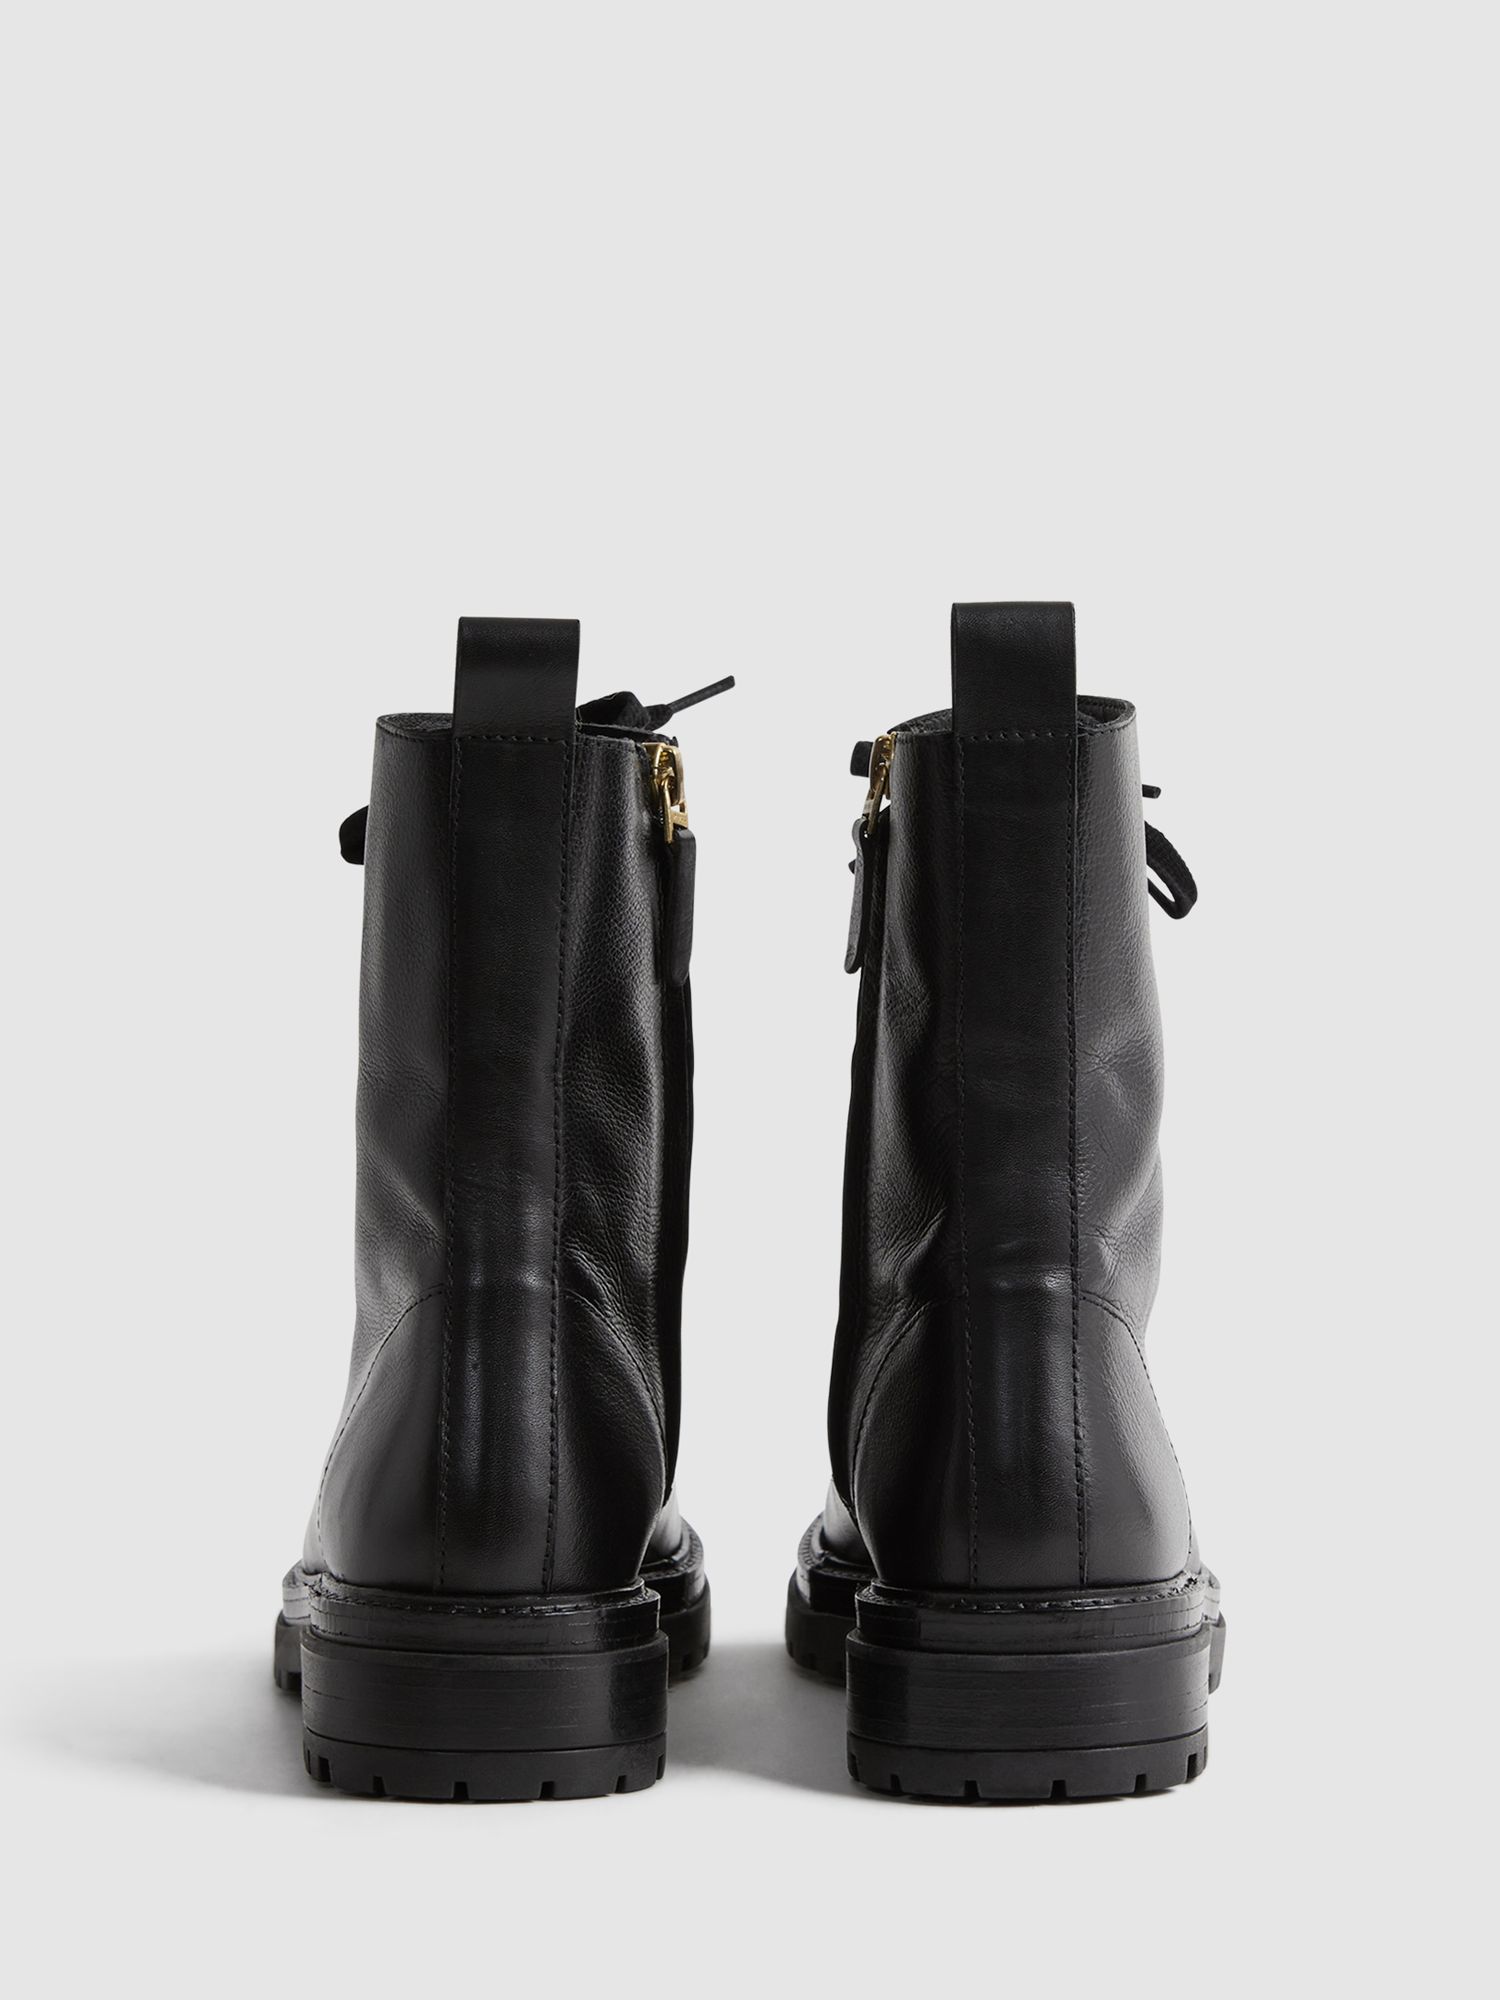 Reiss Jenna Leather Lace Up Boots, Black at John Lewis & Partners